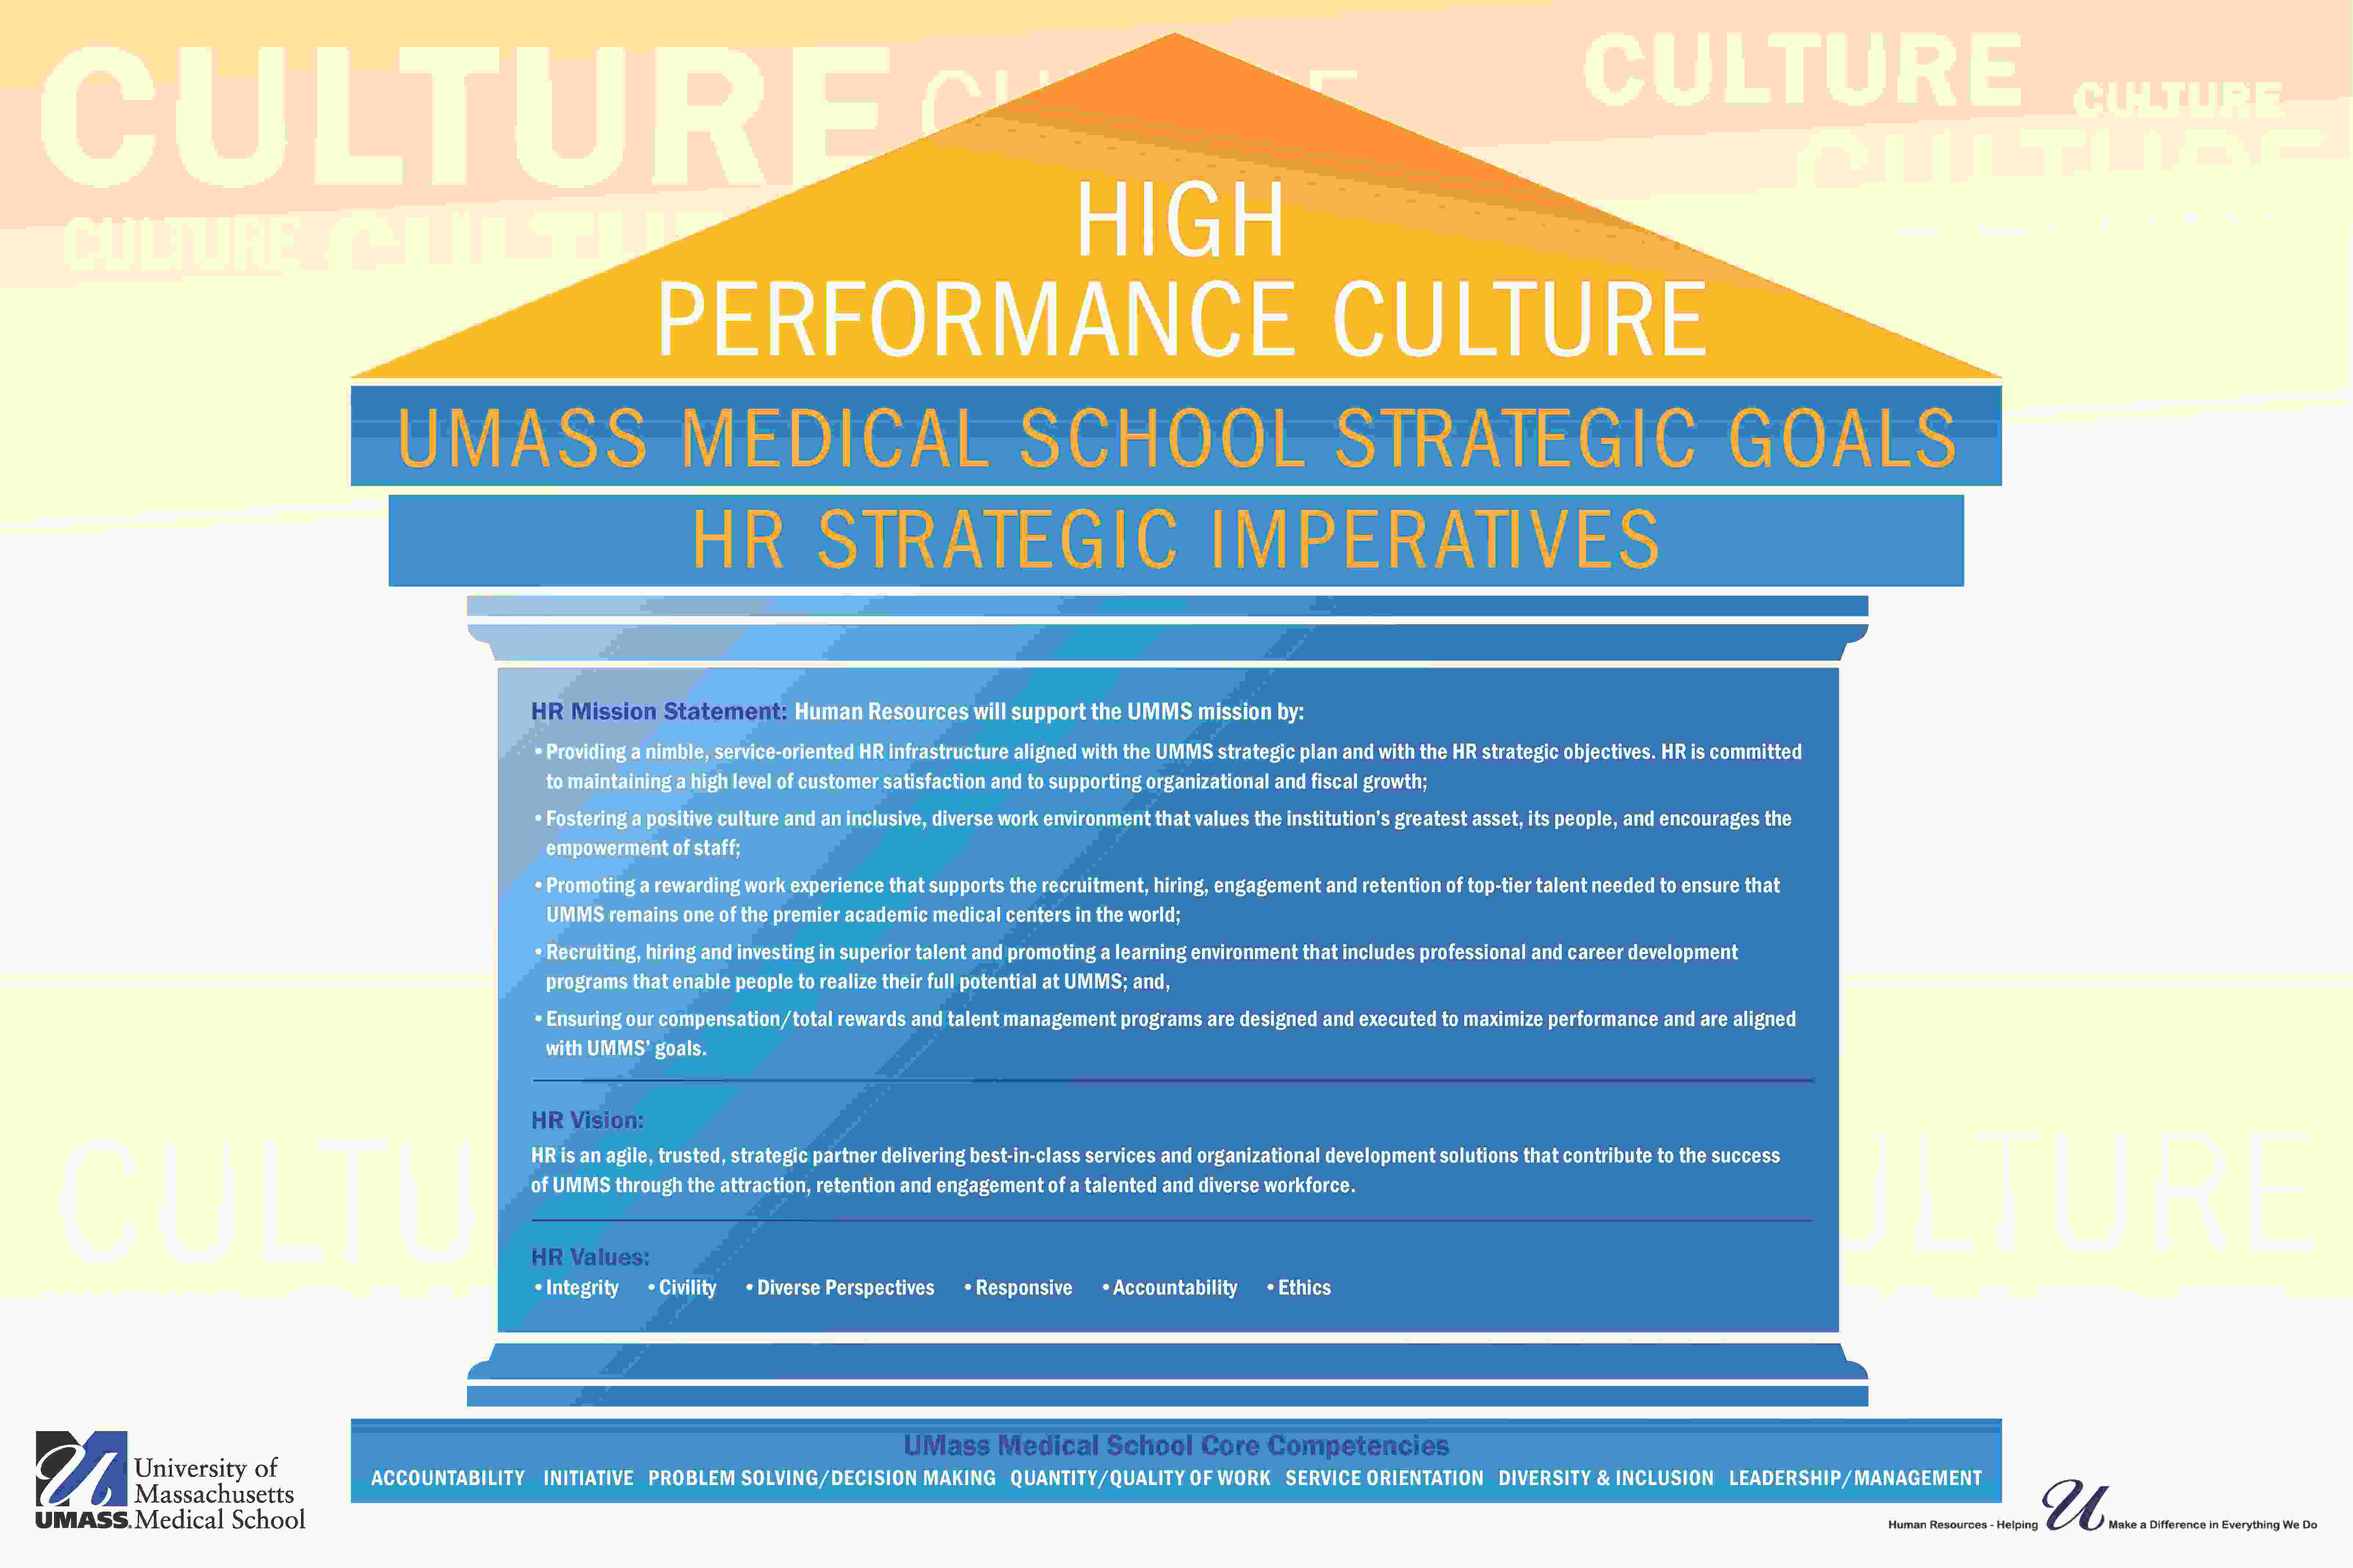 Illustration of building with pillars - High Performance Culture